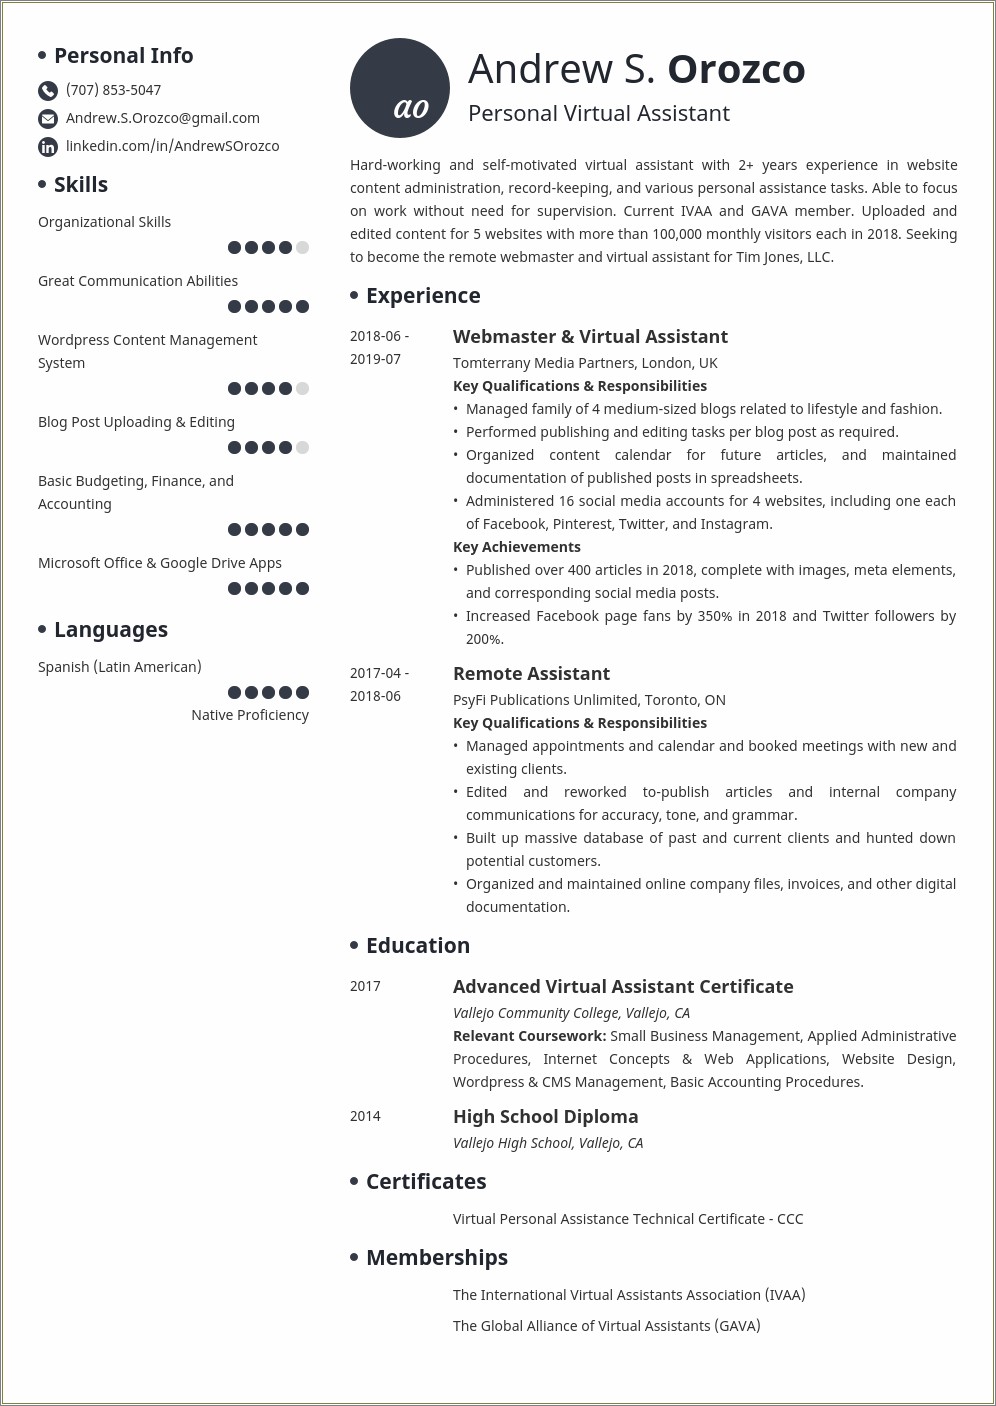 Sample Resume Format For Virtual Assistant